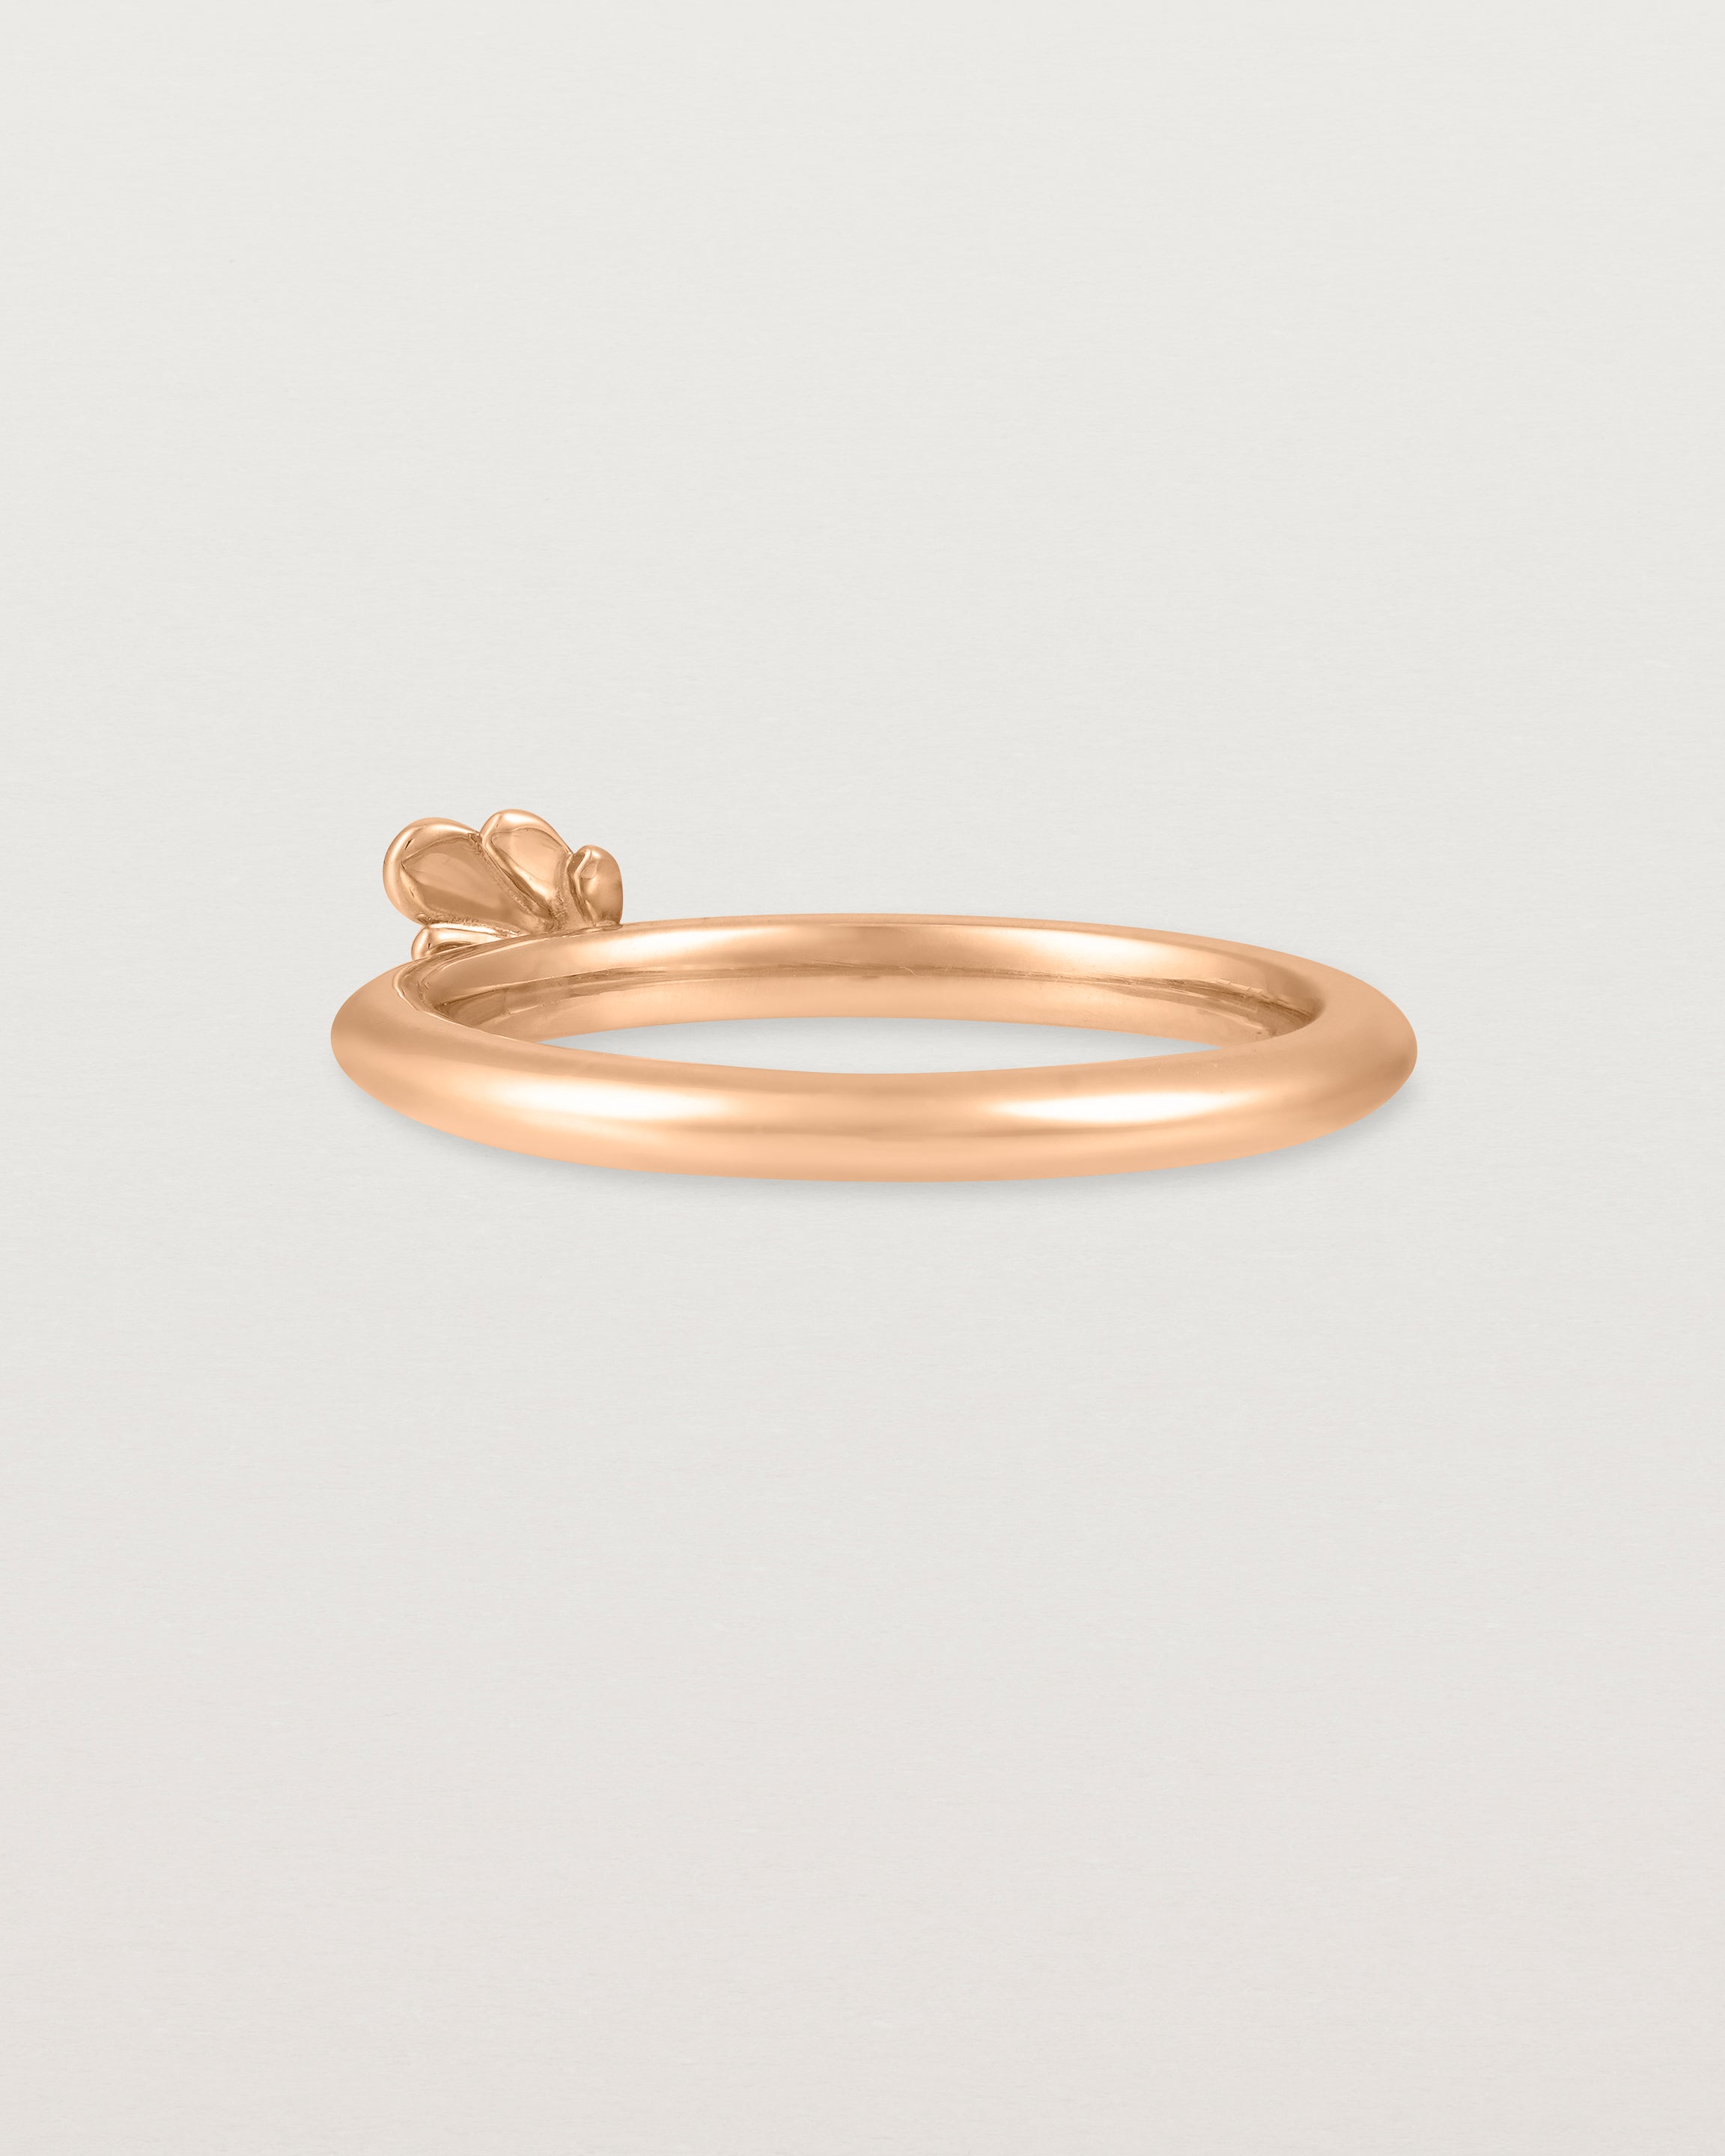 Back view of the Aeris Stacking Ring in Rose Gold.